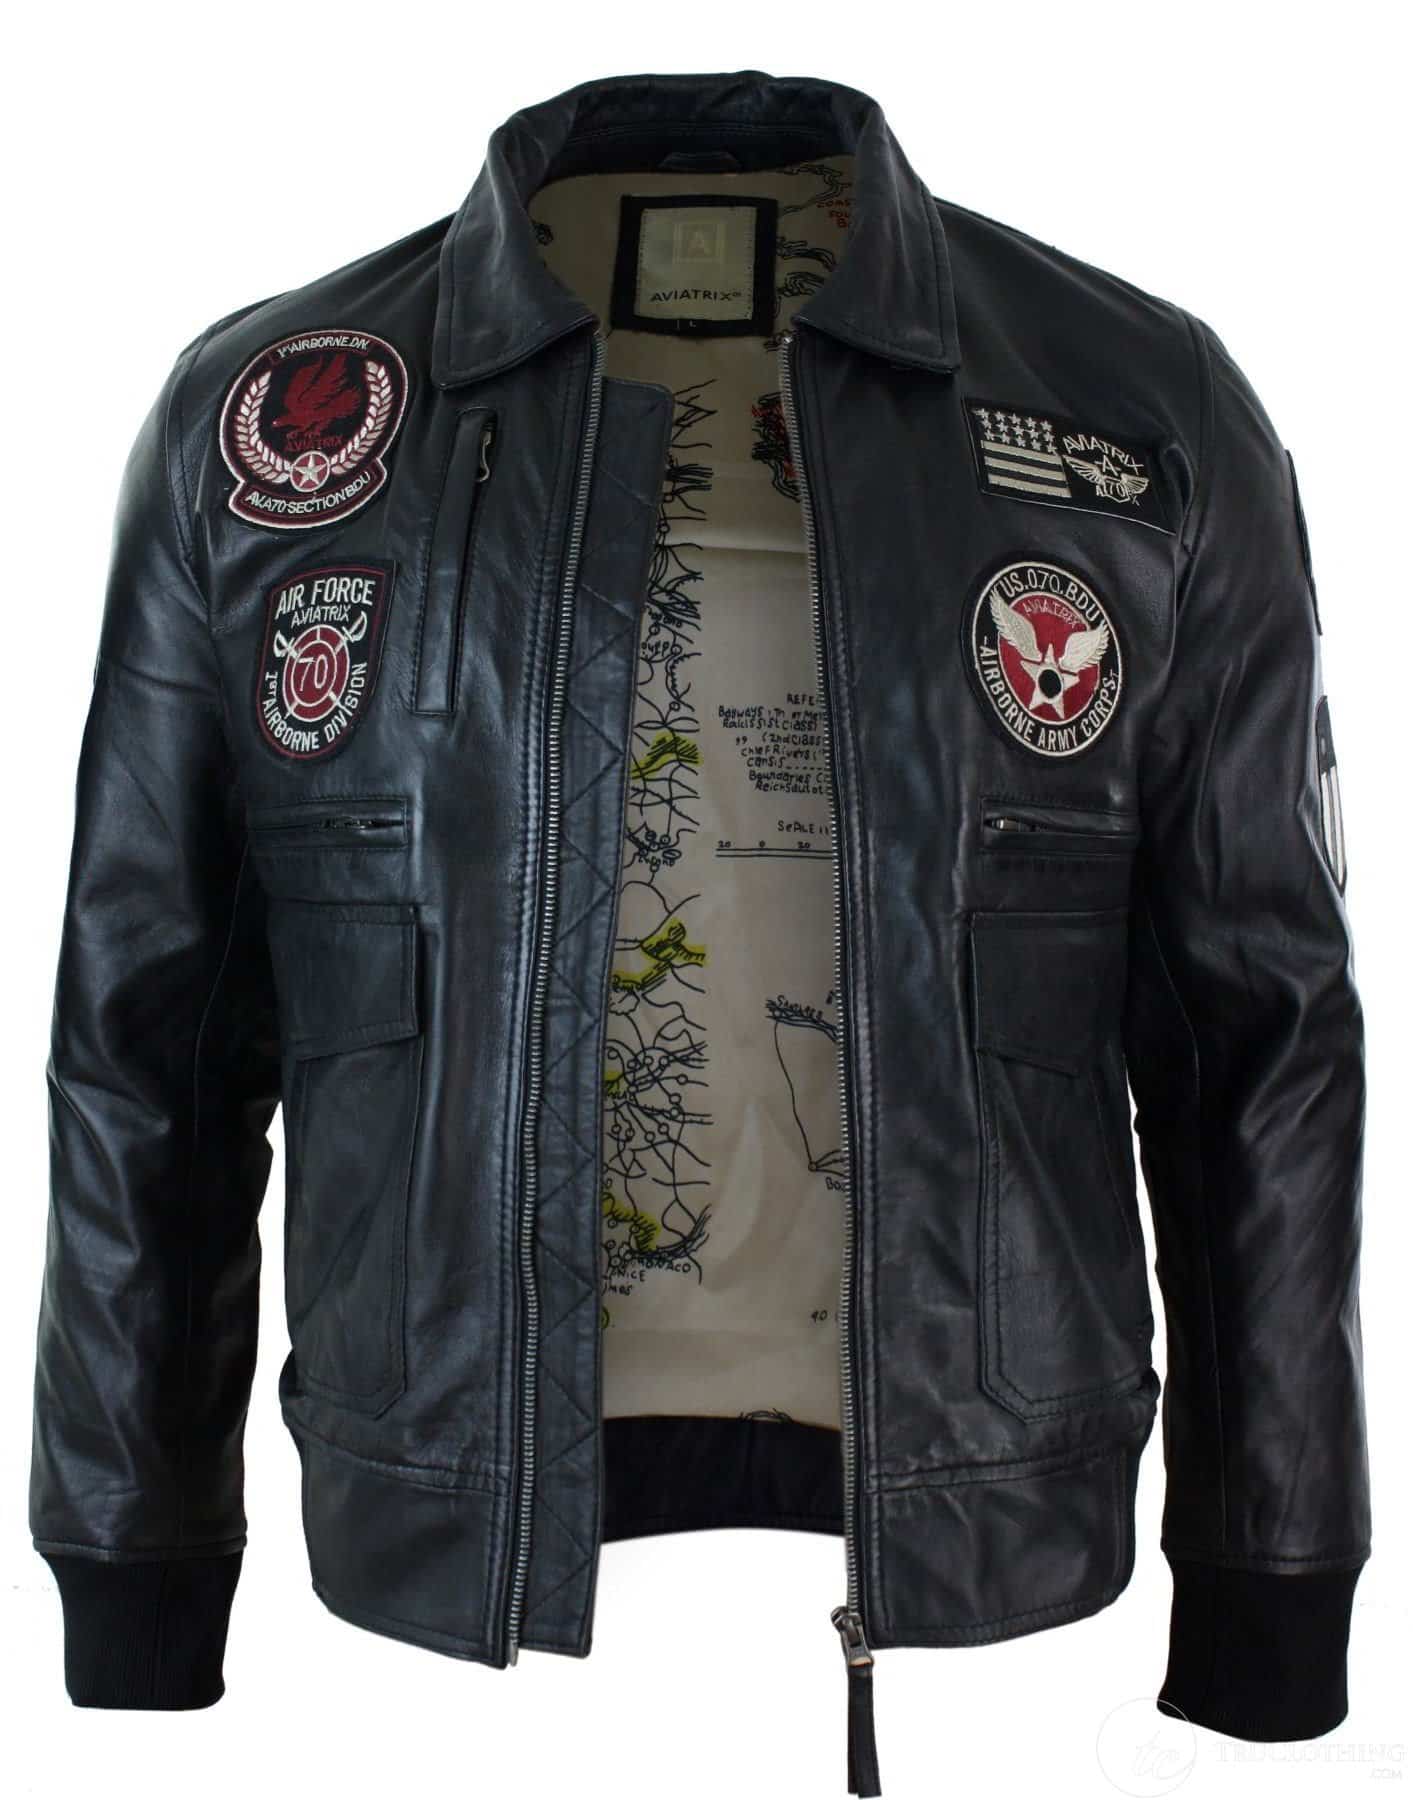 Air Force Pilot Jacket - Airforce Military